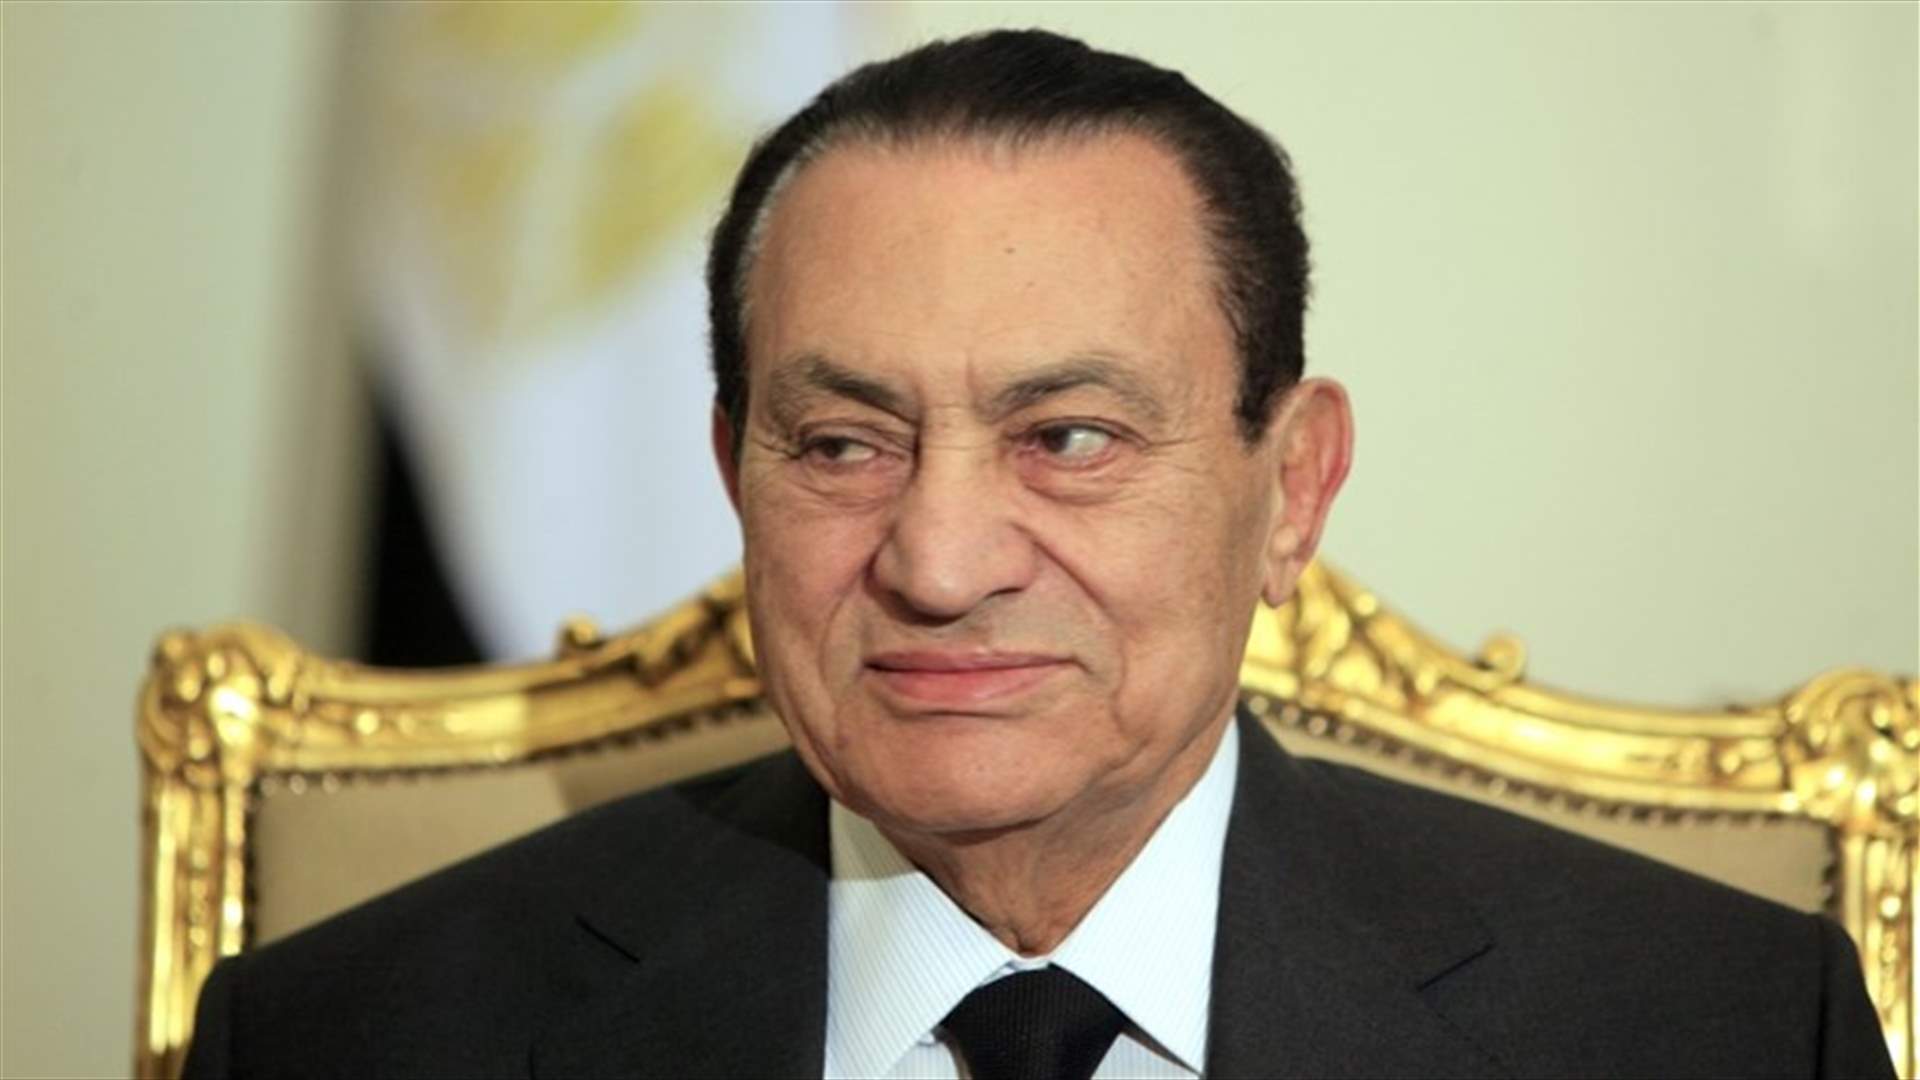 In final ruling, Egyptian court acquits Mubarak over killing of protesters